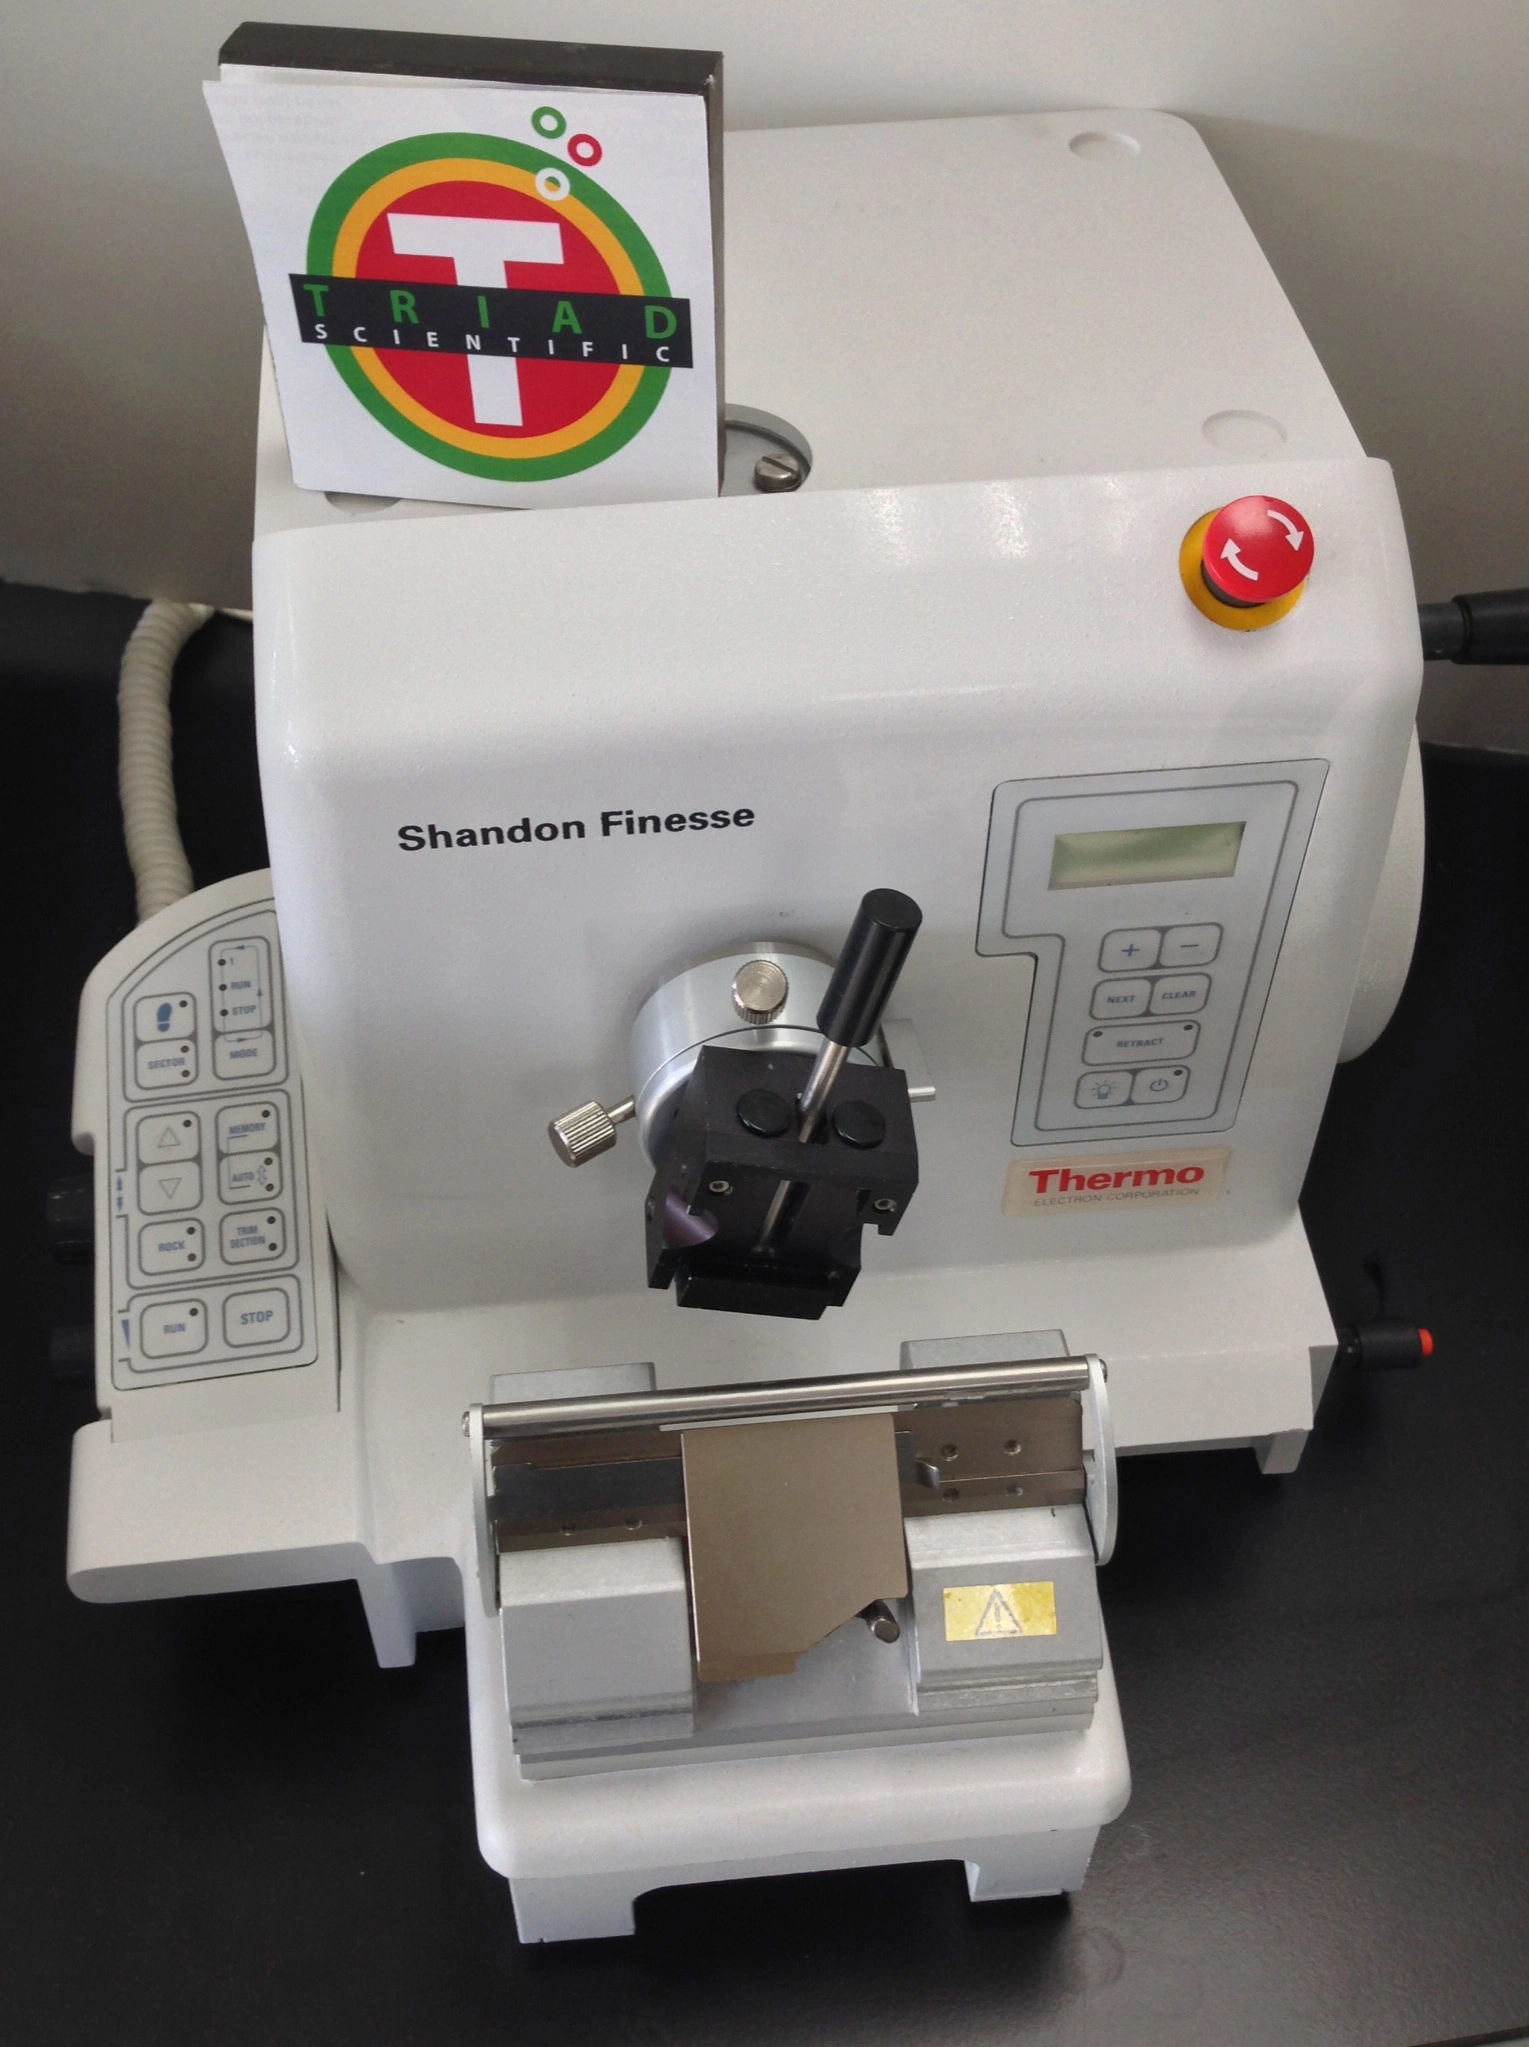 Thermo Shandon Finesse ME Microtome Thjermo Microtome Shandon Microtome used nice This Finesse Microtome has a motorized cutt